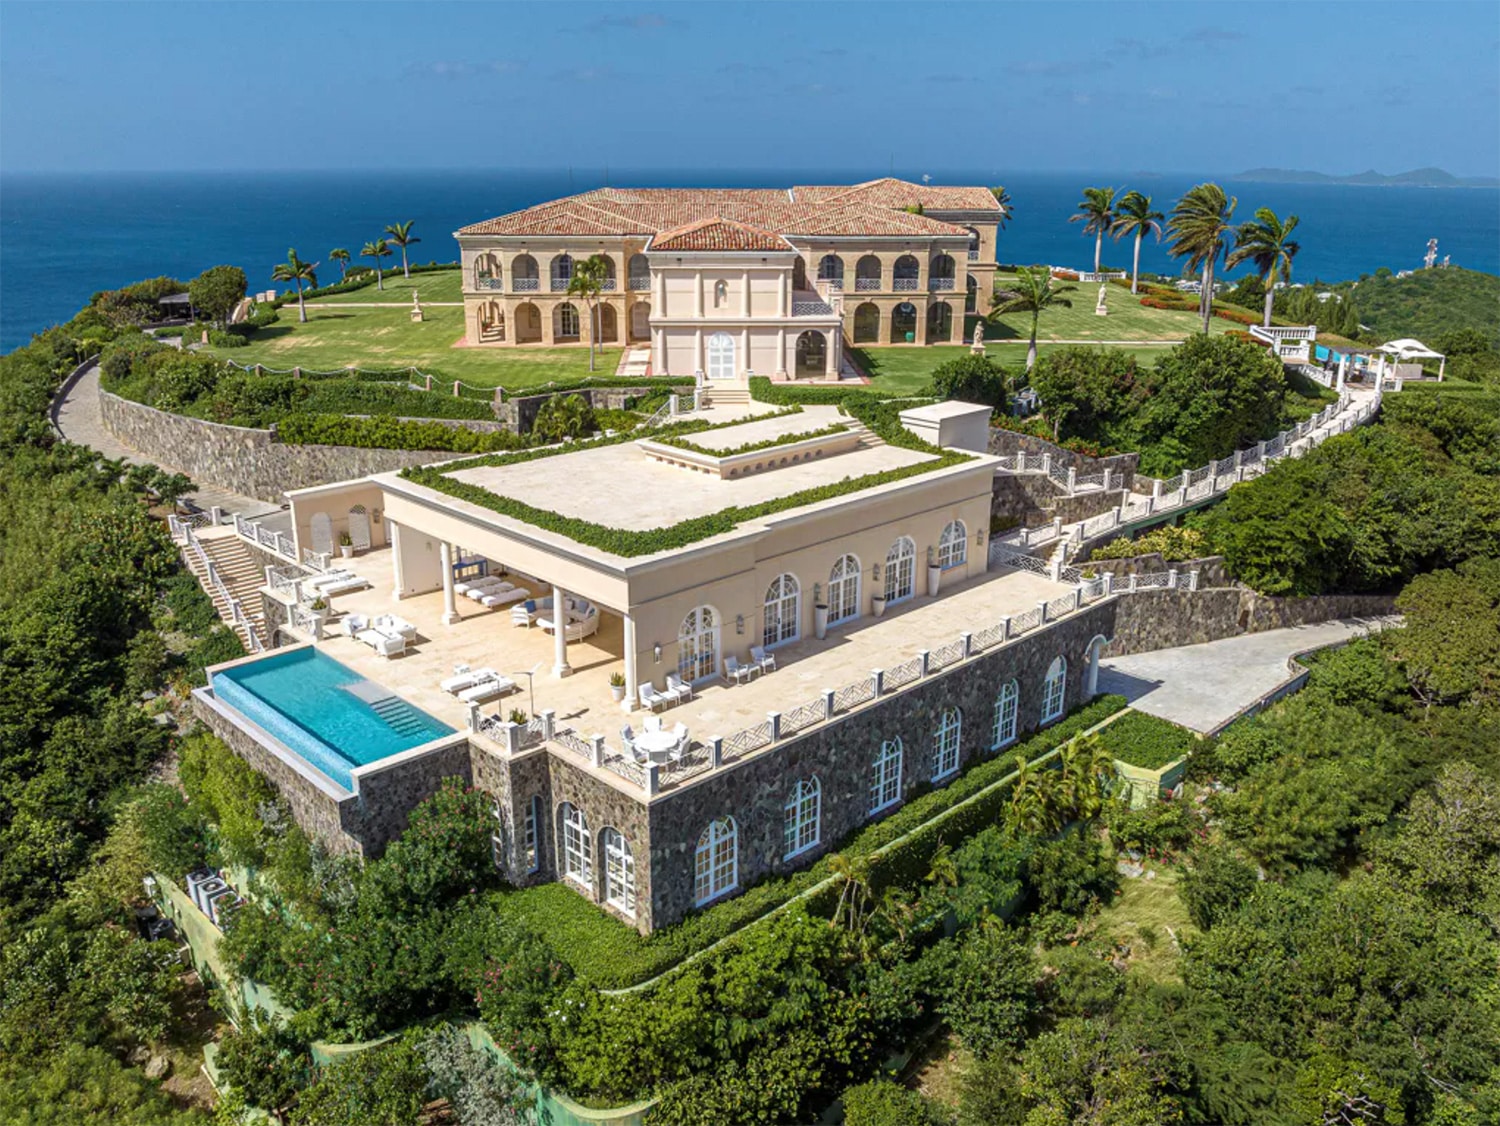 An aerial side view of The Terraces, a $200 million dream home on the Caribbean island of Mustique in St. Vincent and the Grenadines.